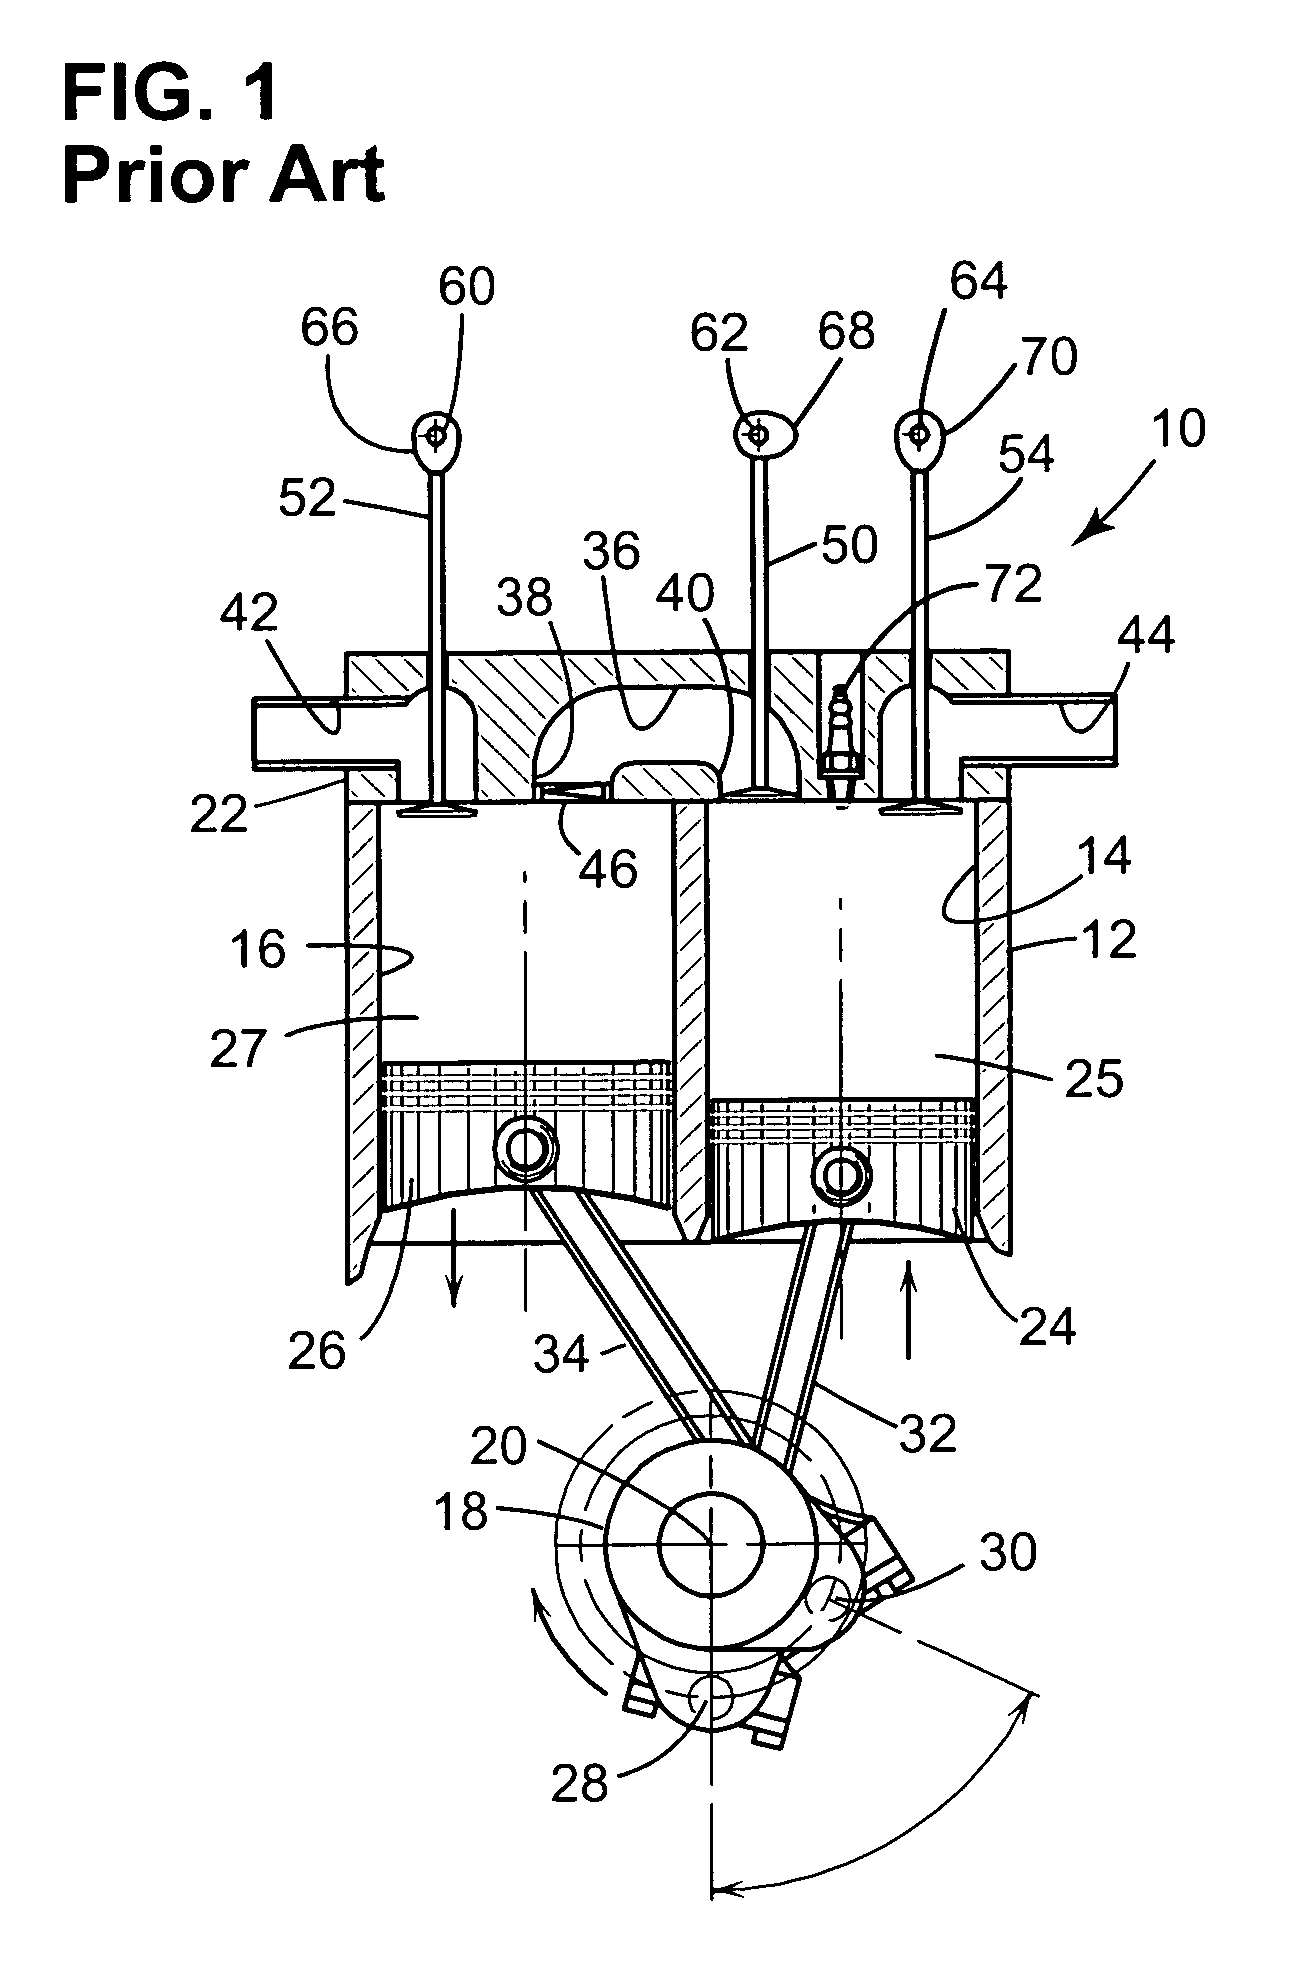 Split-cycle engine with water injection